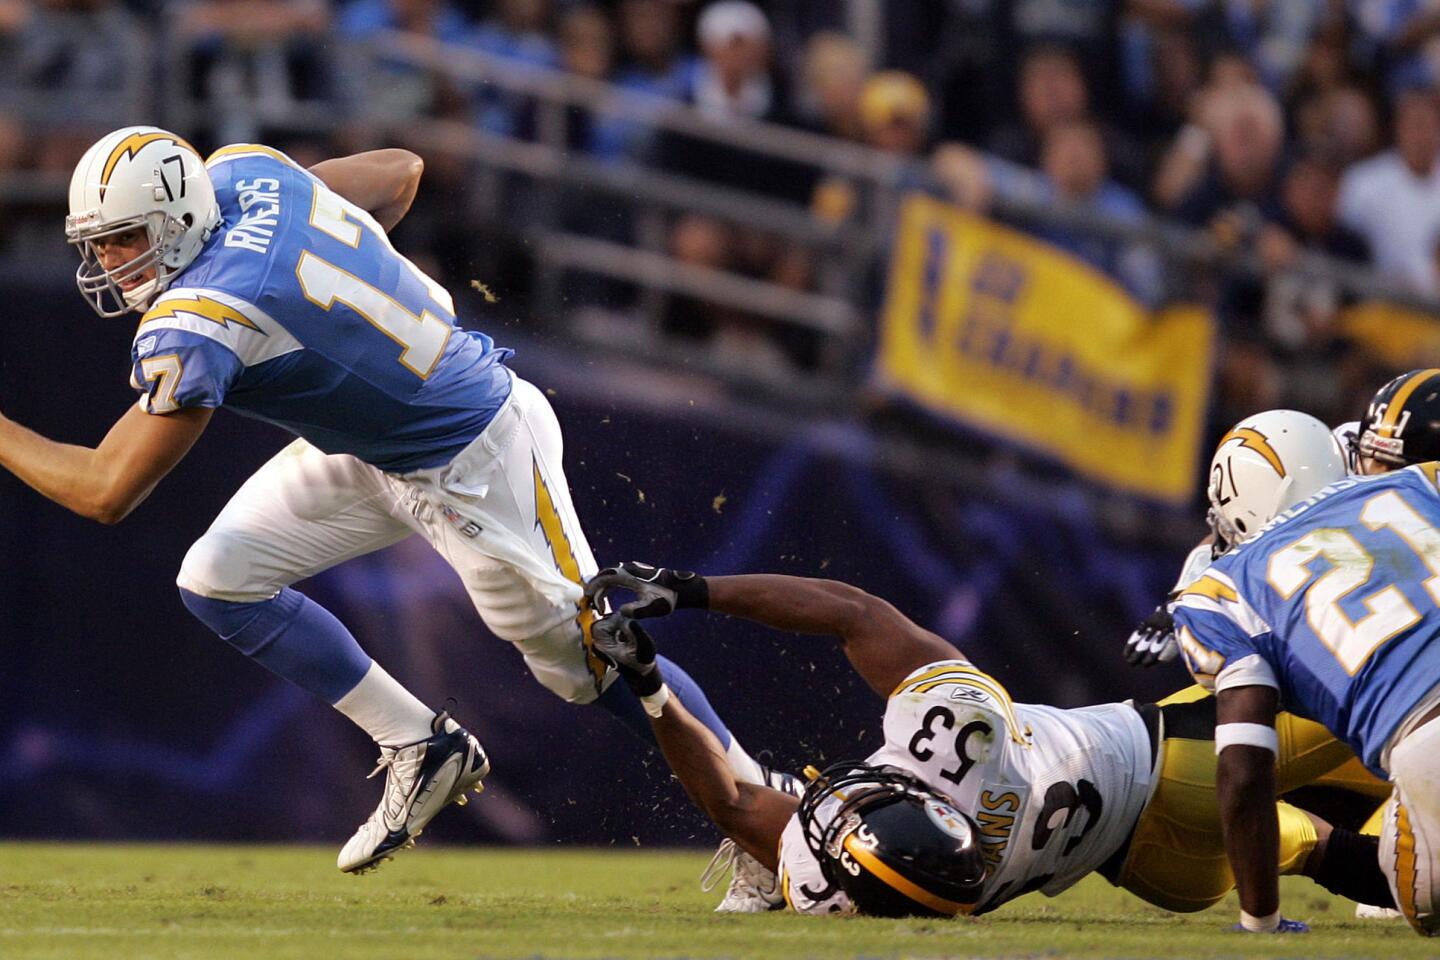 Chargers vs Steelers